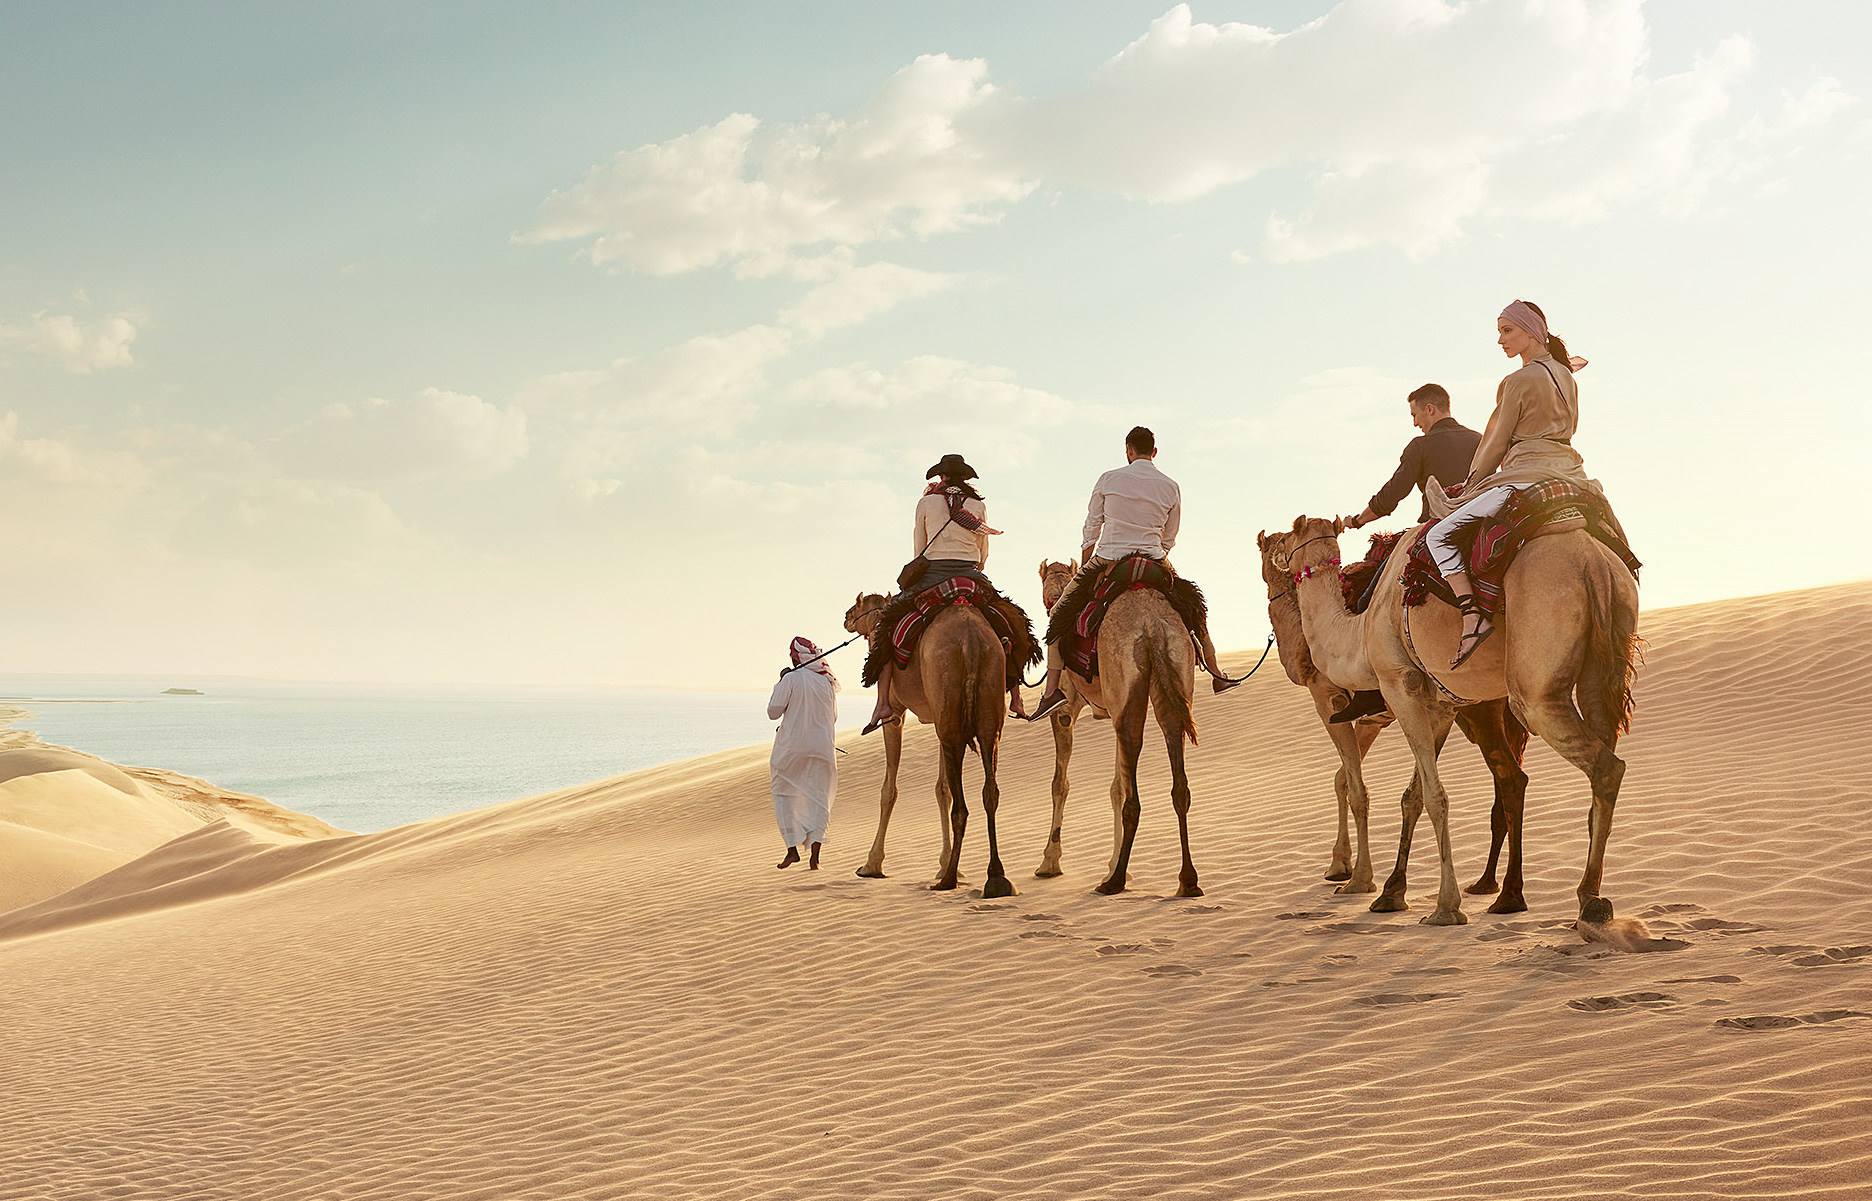 The top 10 things to do with kids in Qatar 